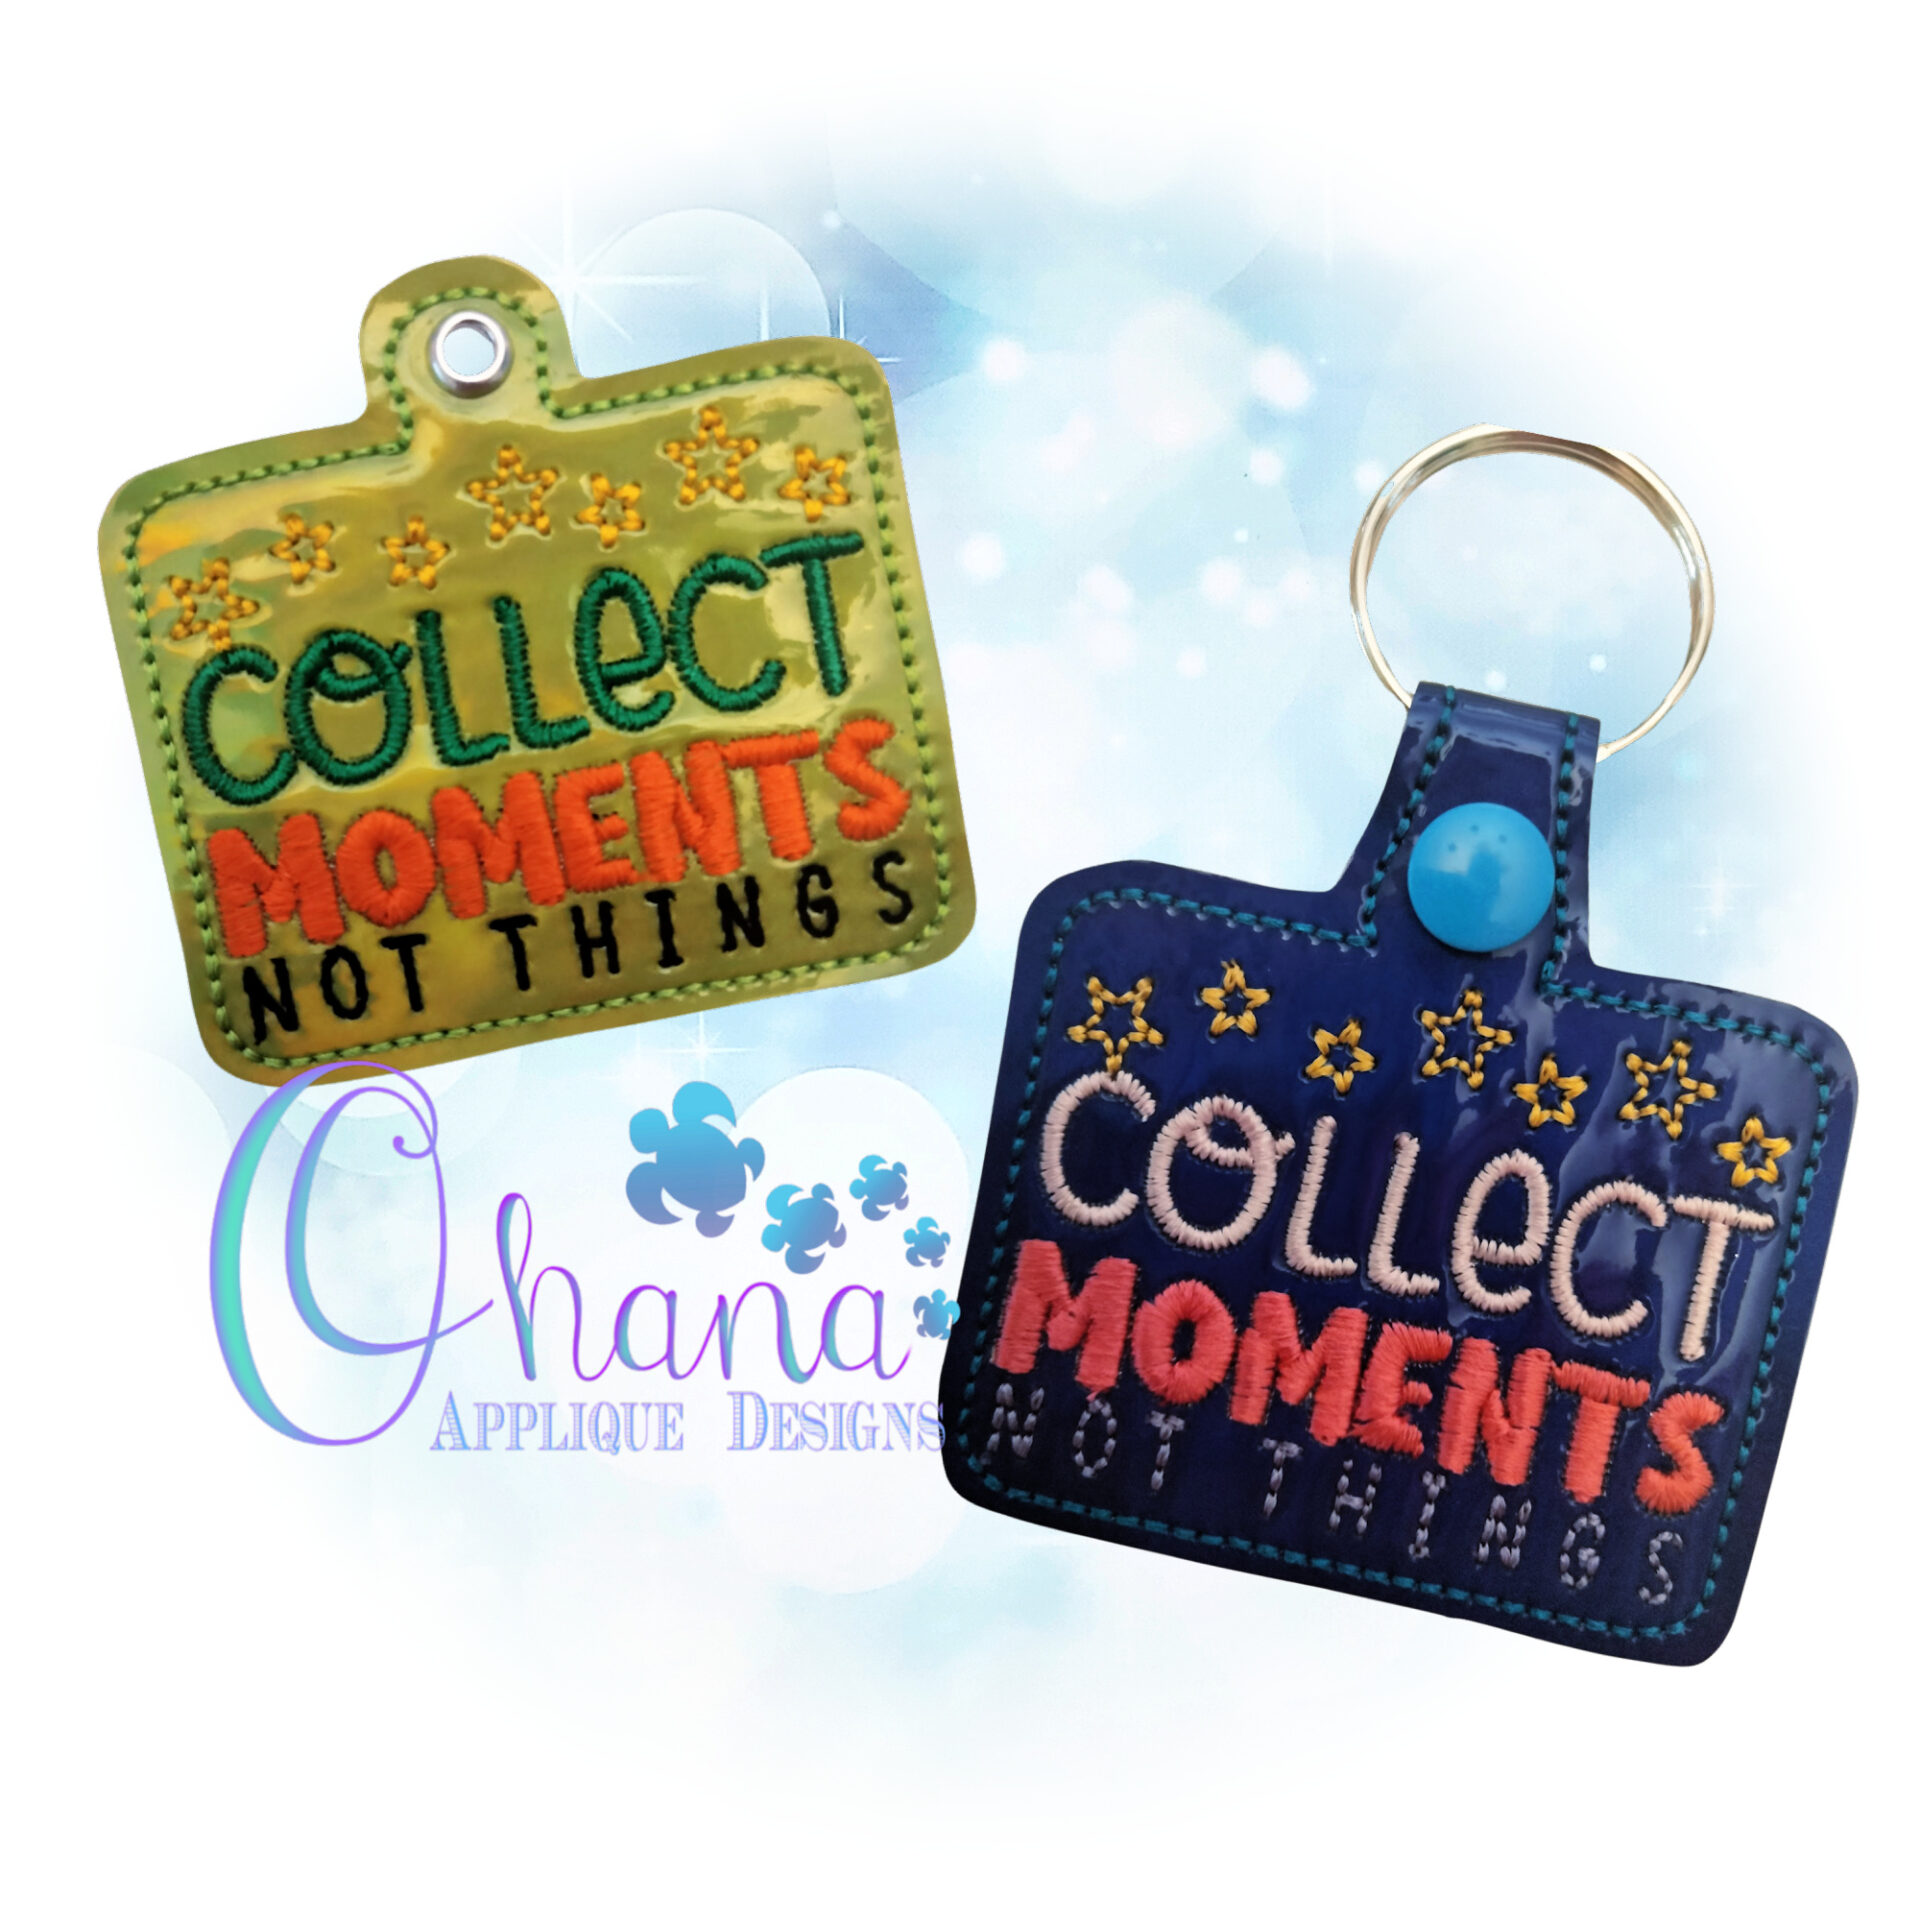 Collect Moments Not Things Key Chain